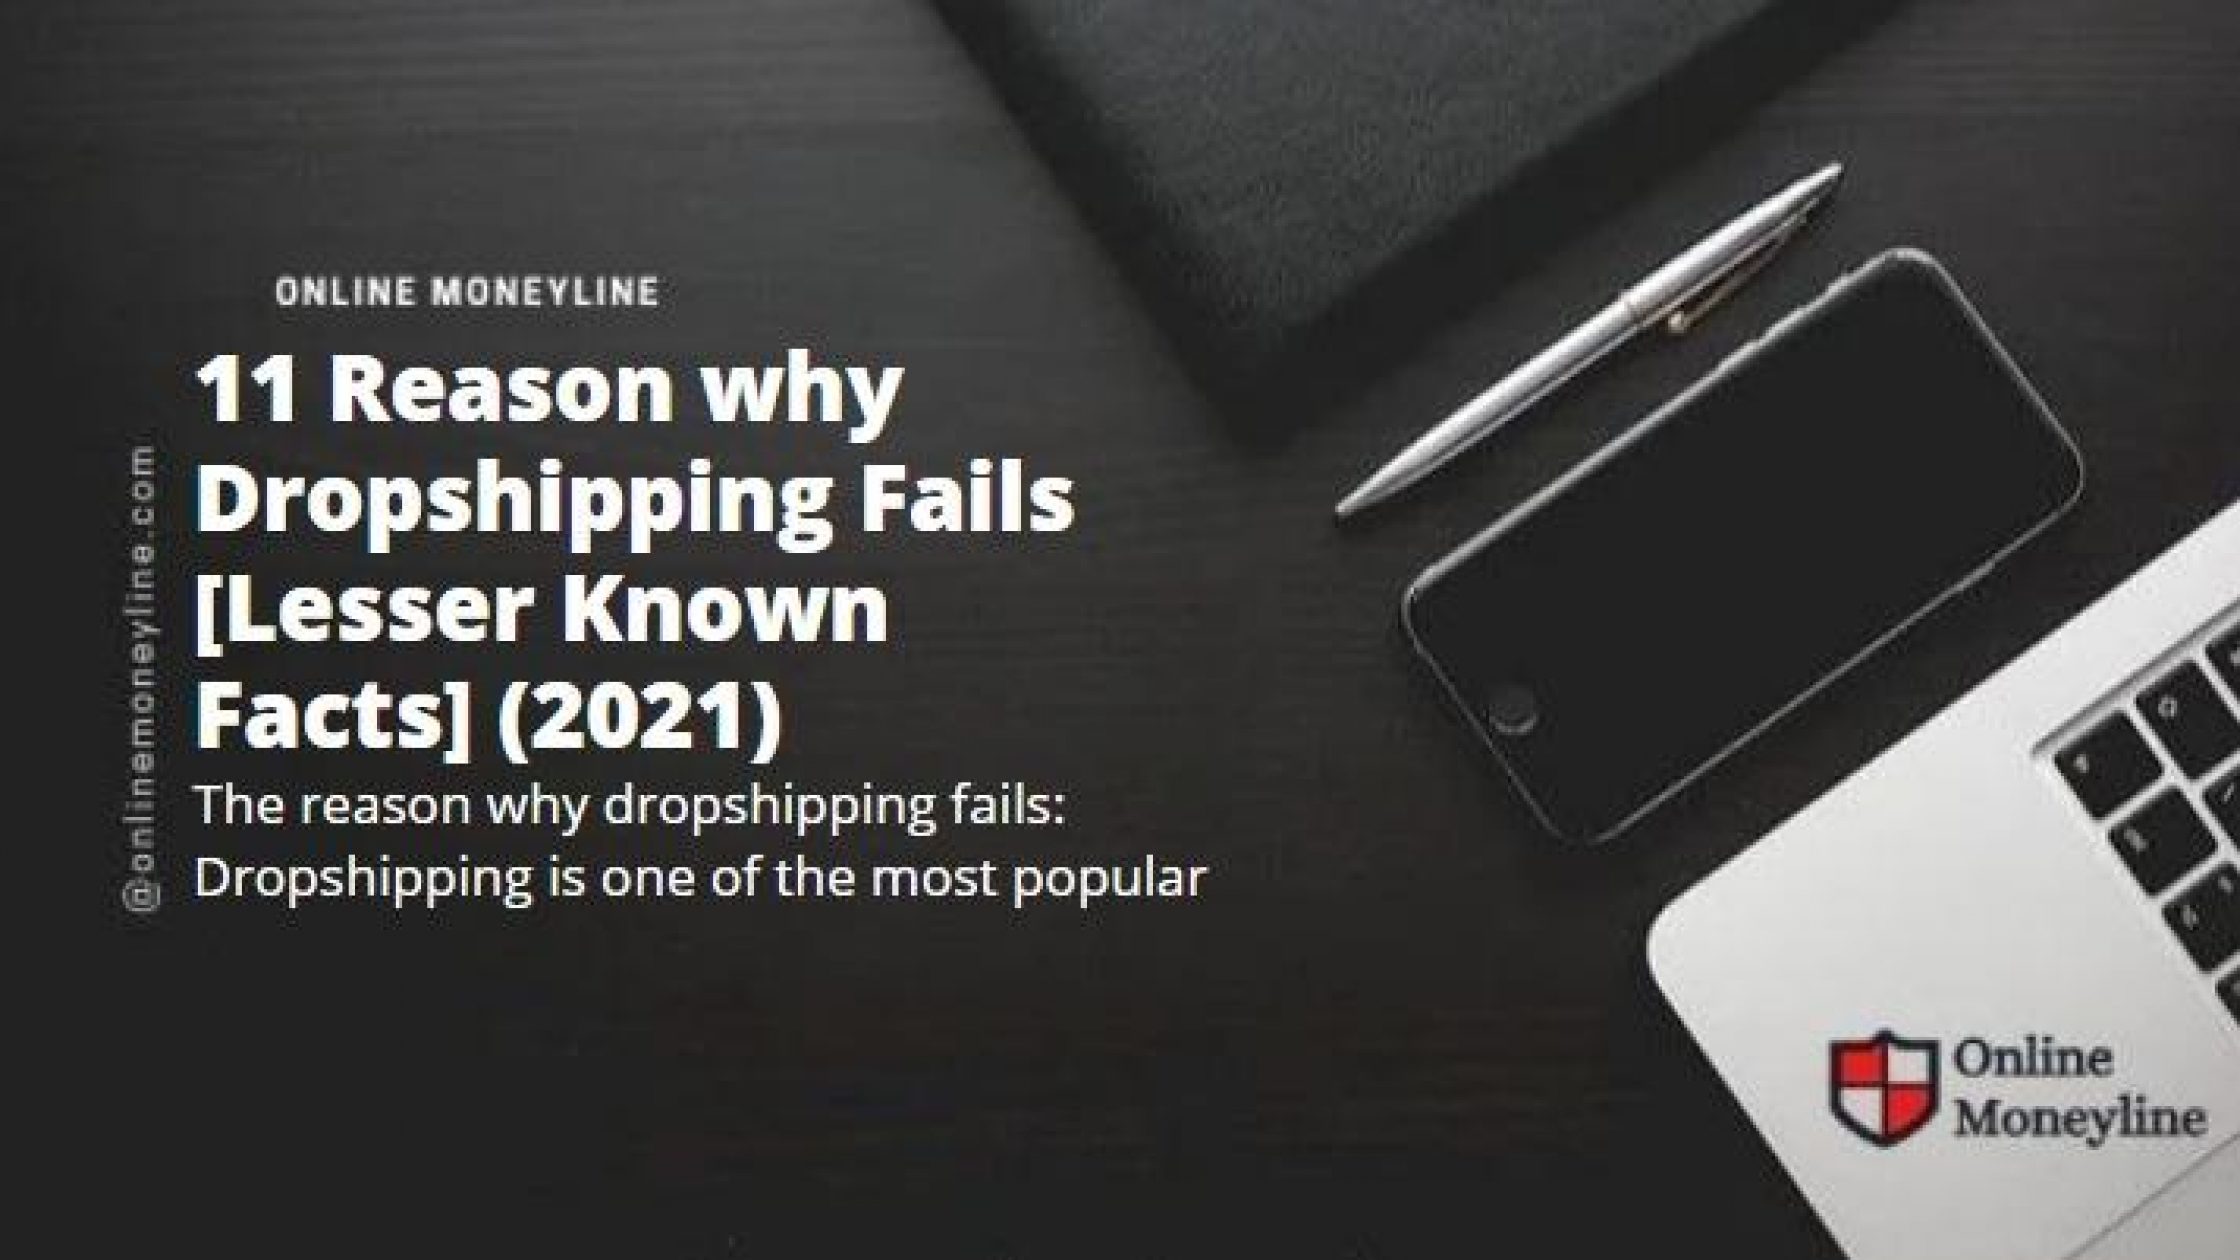 20 Reasons why Dropshipping Fails [Lesser Known Facts] (2022)